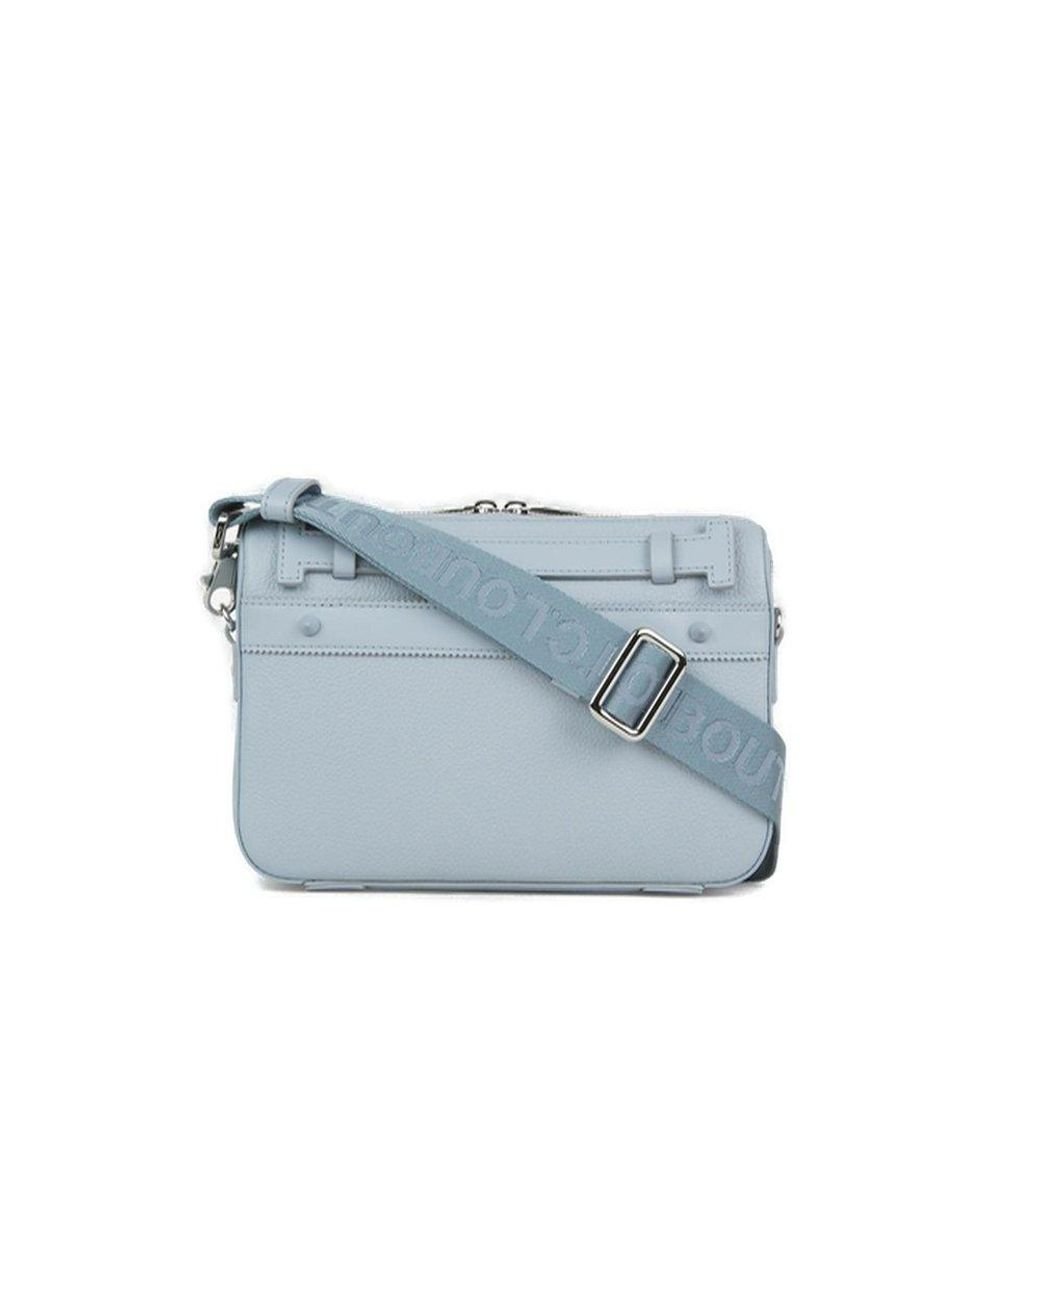 CHRISTIAN LOUBOUTIN: Ruisbuddy bag in grained leather - Blue